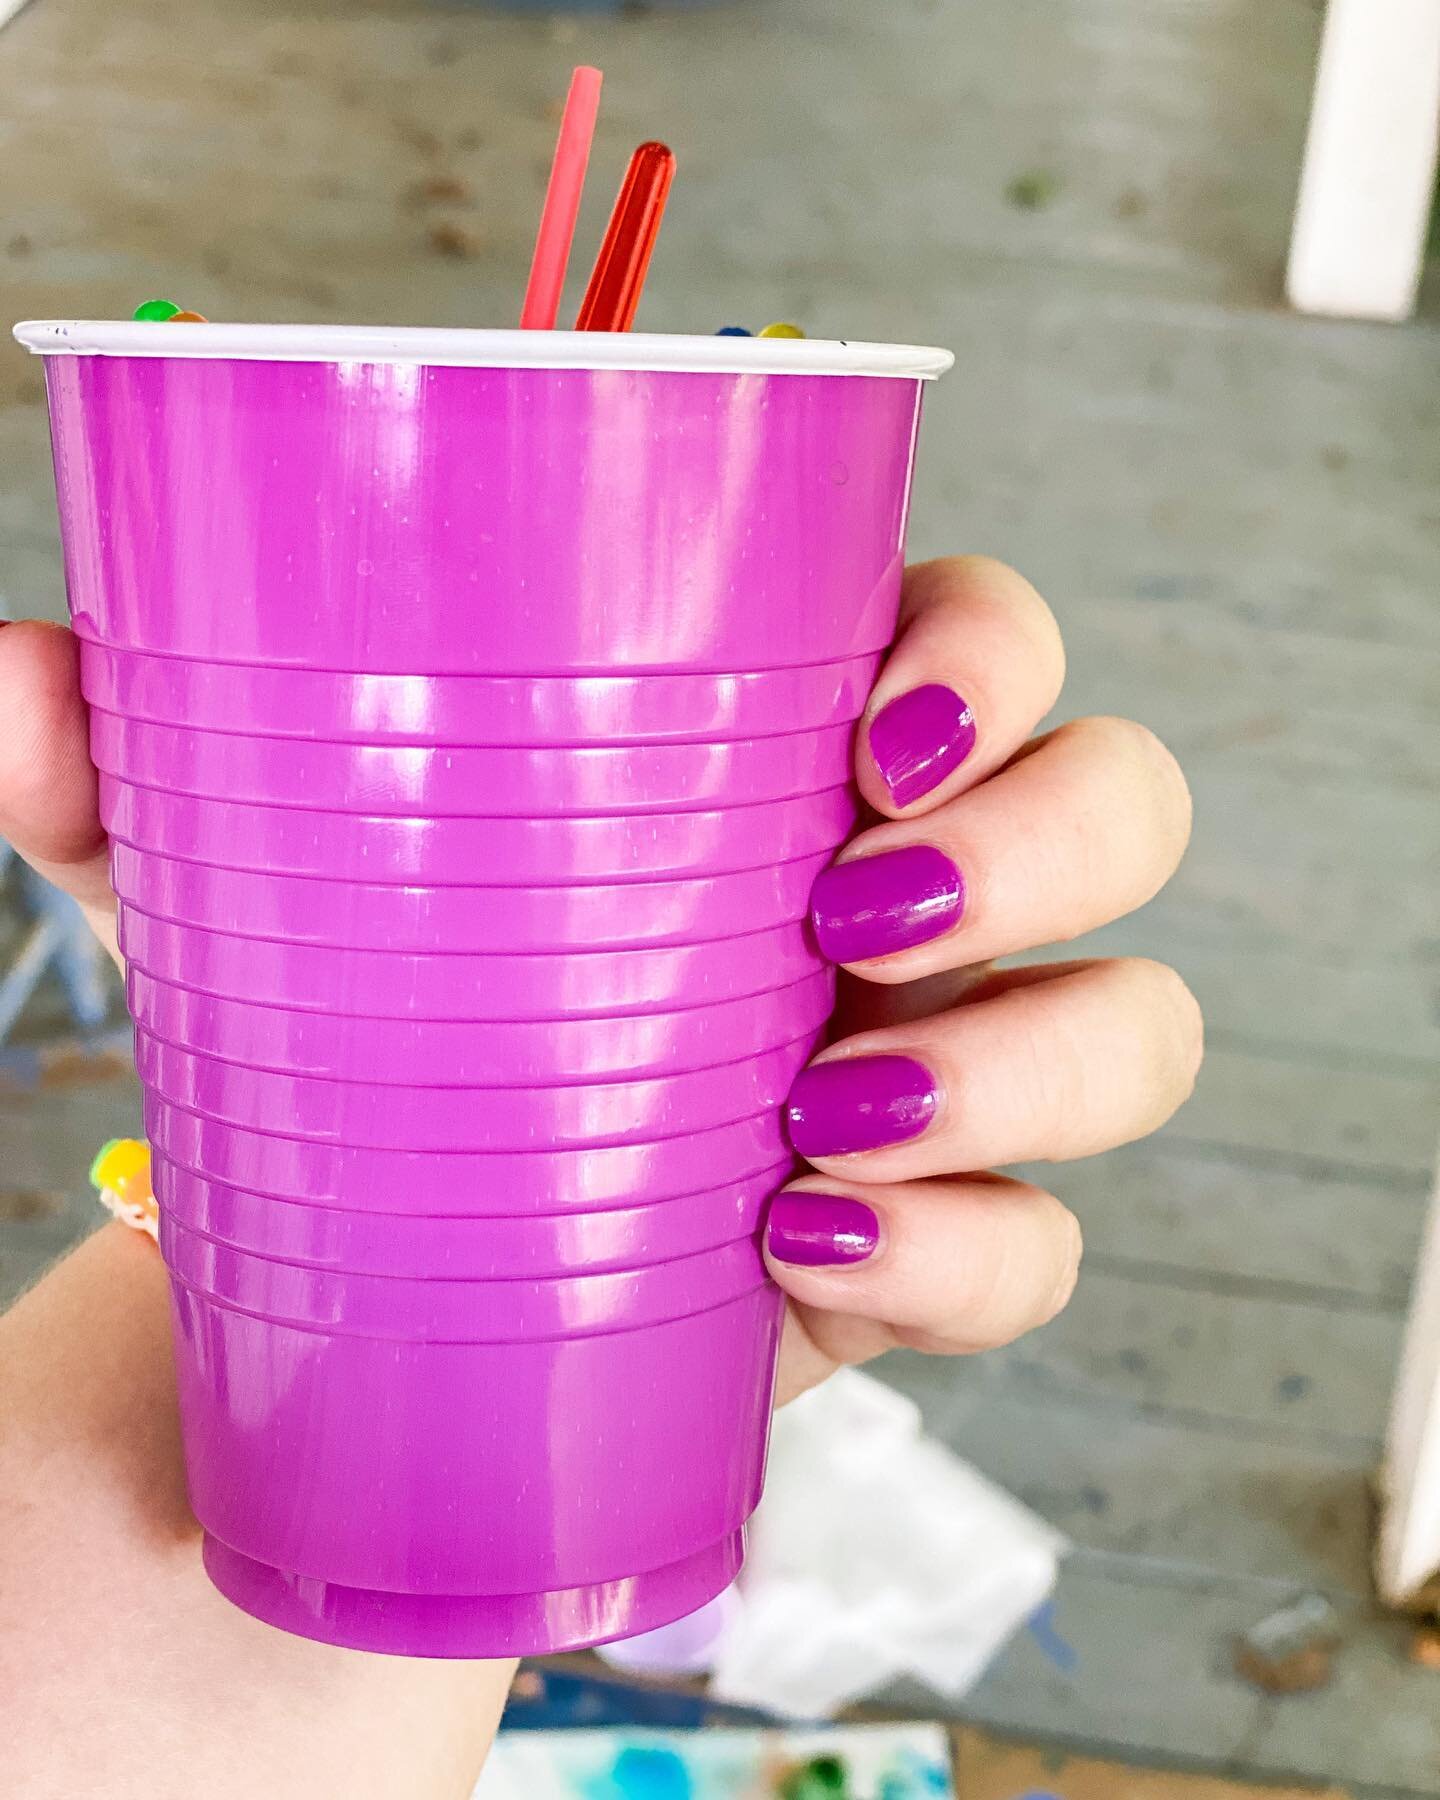 New summer goals, match my nails with my solo cup🤣.

But for real, run don&rsquo;t walk, @oliveandjune is having their summer sale and everything is 20% off but it ends tomorrow!

There are minis, summer colors, and everything you need!

I don&rsquo